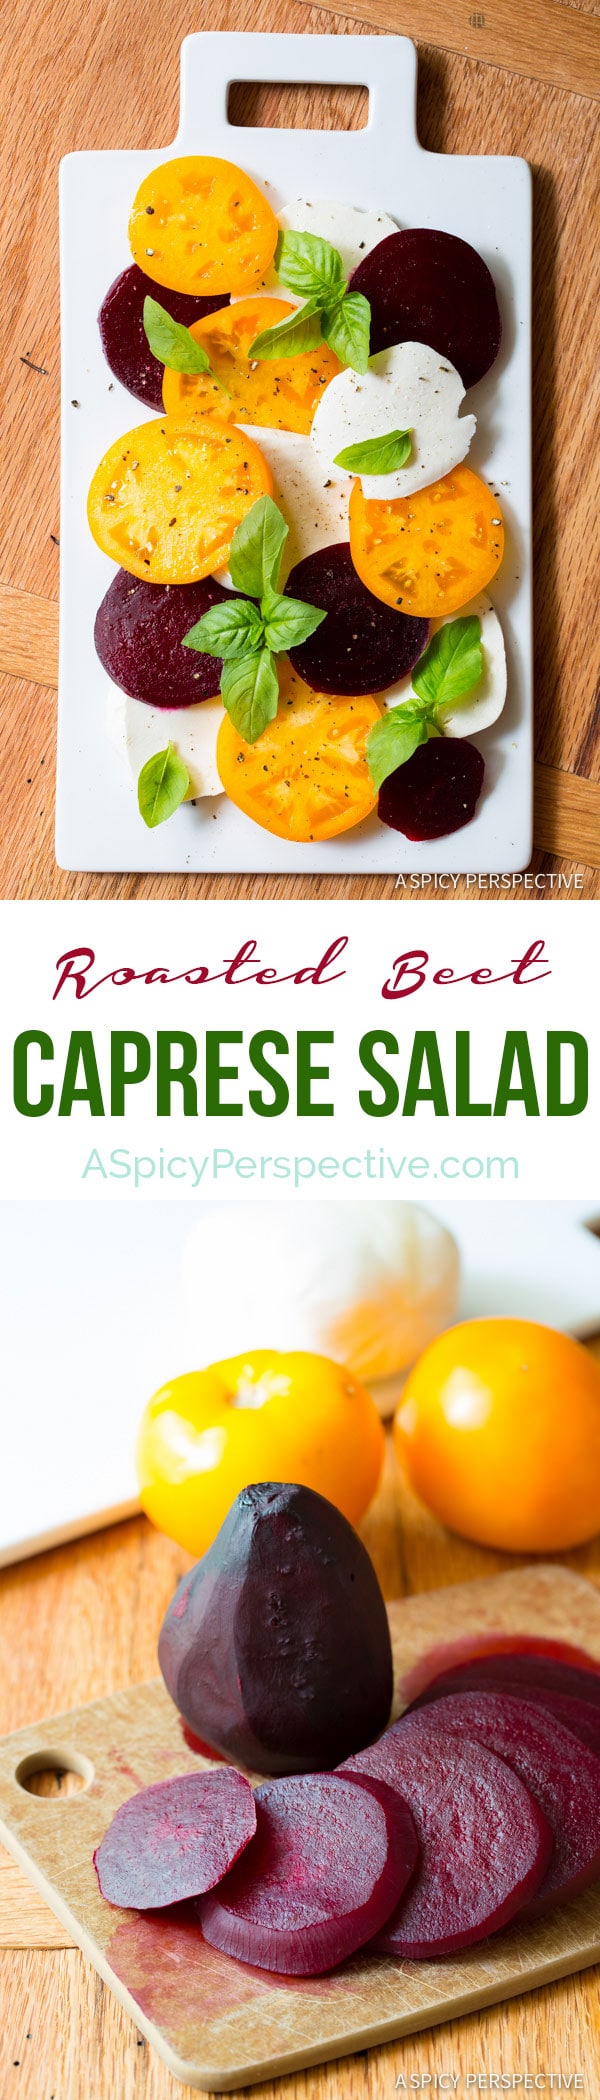 caprese salad recipe with roasted beets